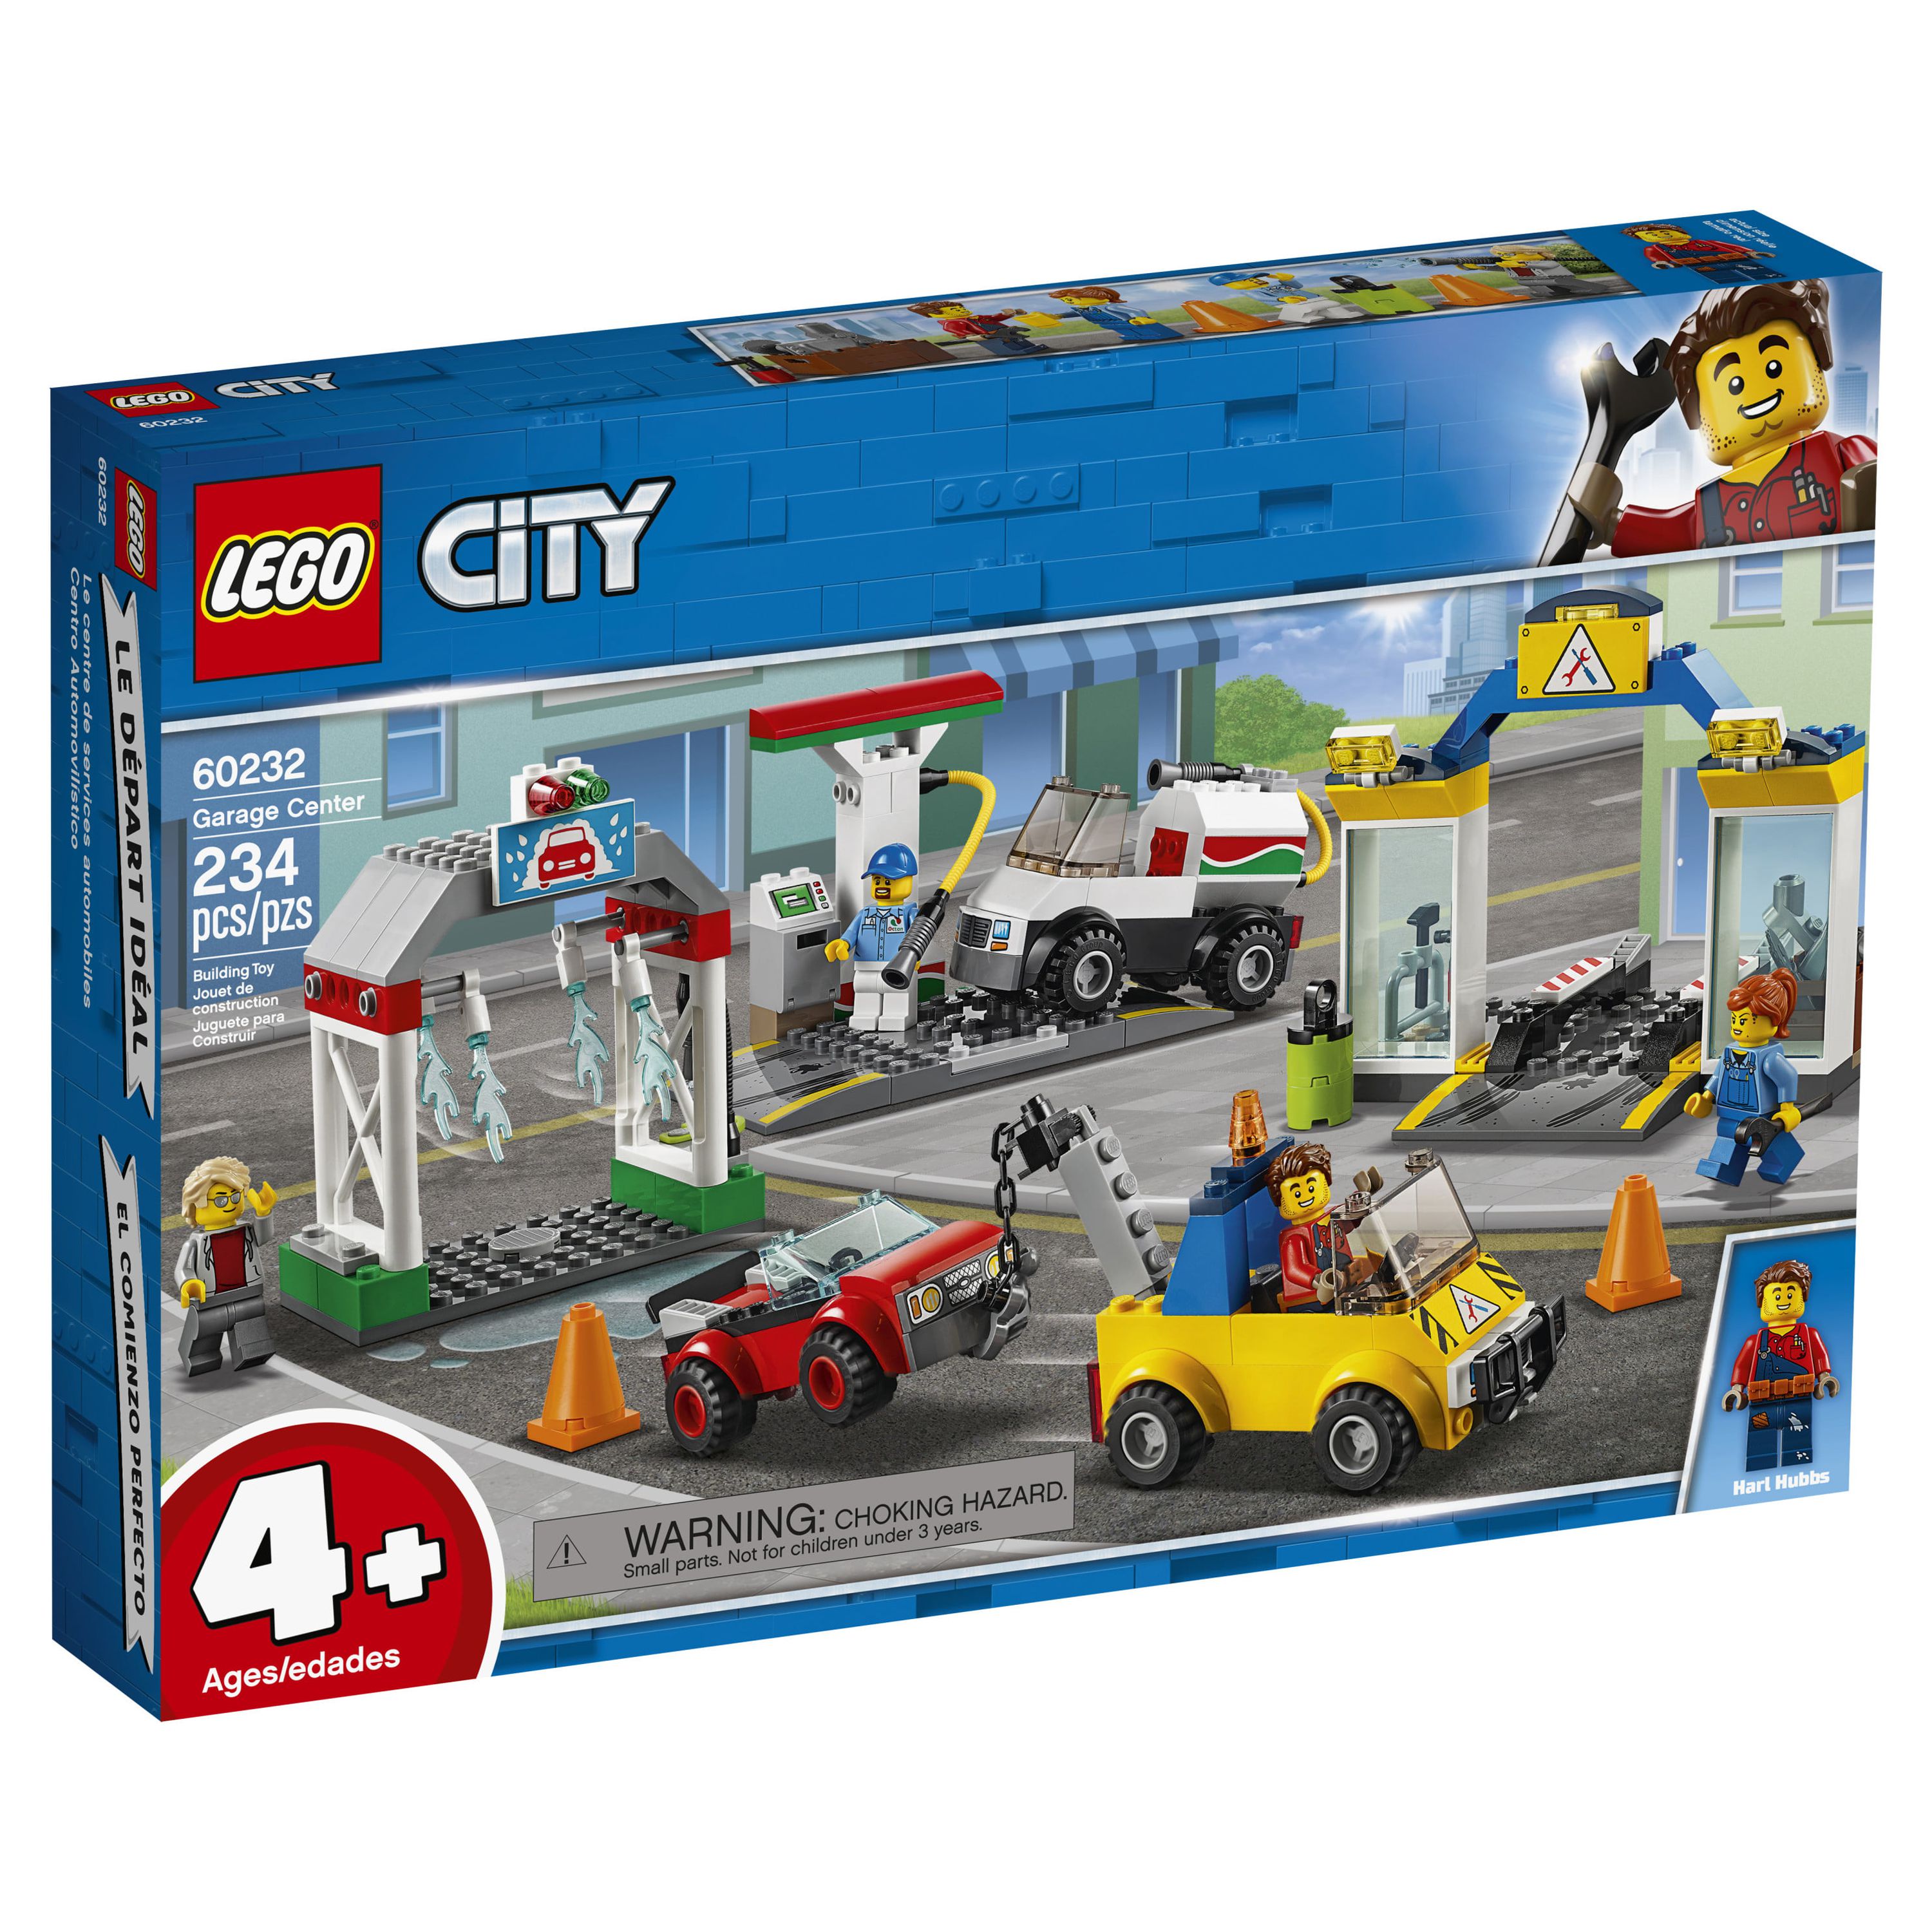 LEGO City Garage Center 60232 Preschool Kids Building Toy Truck Car Garage Gas Station Learning Play Kit (234 Pieces) - image 5 of 6